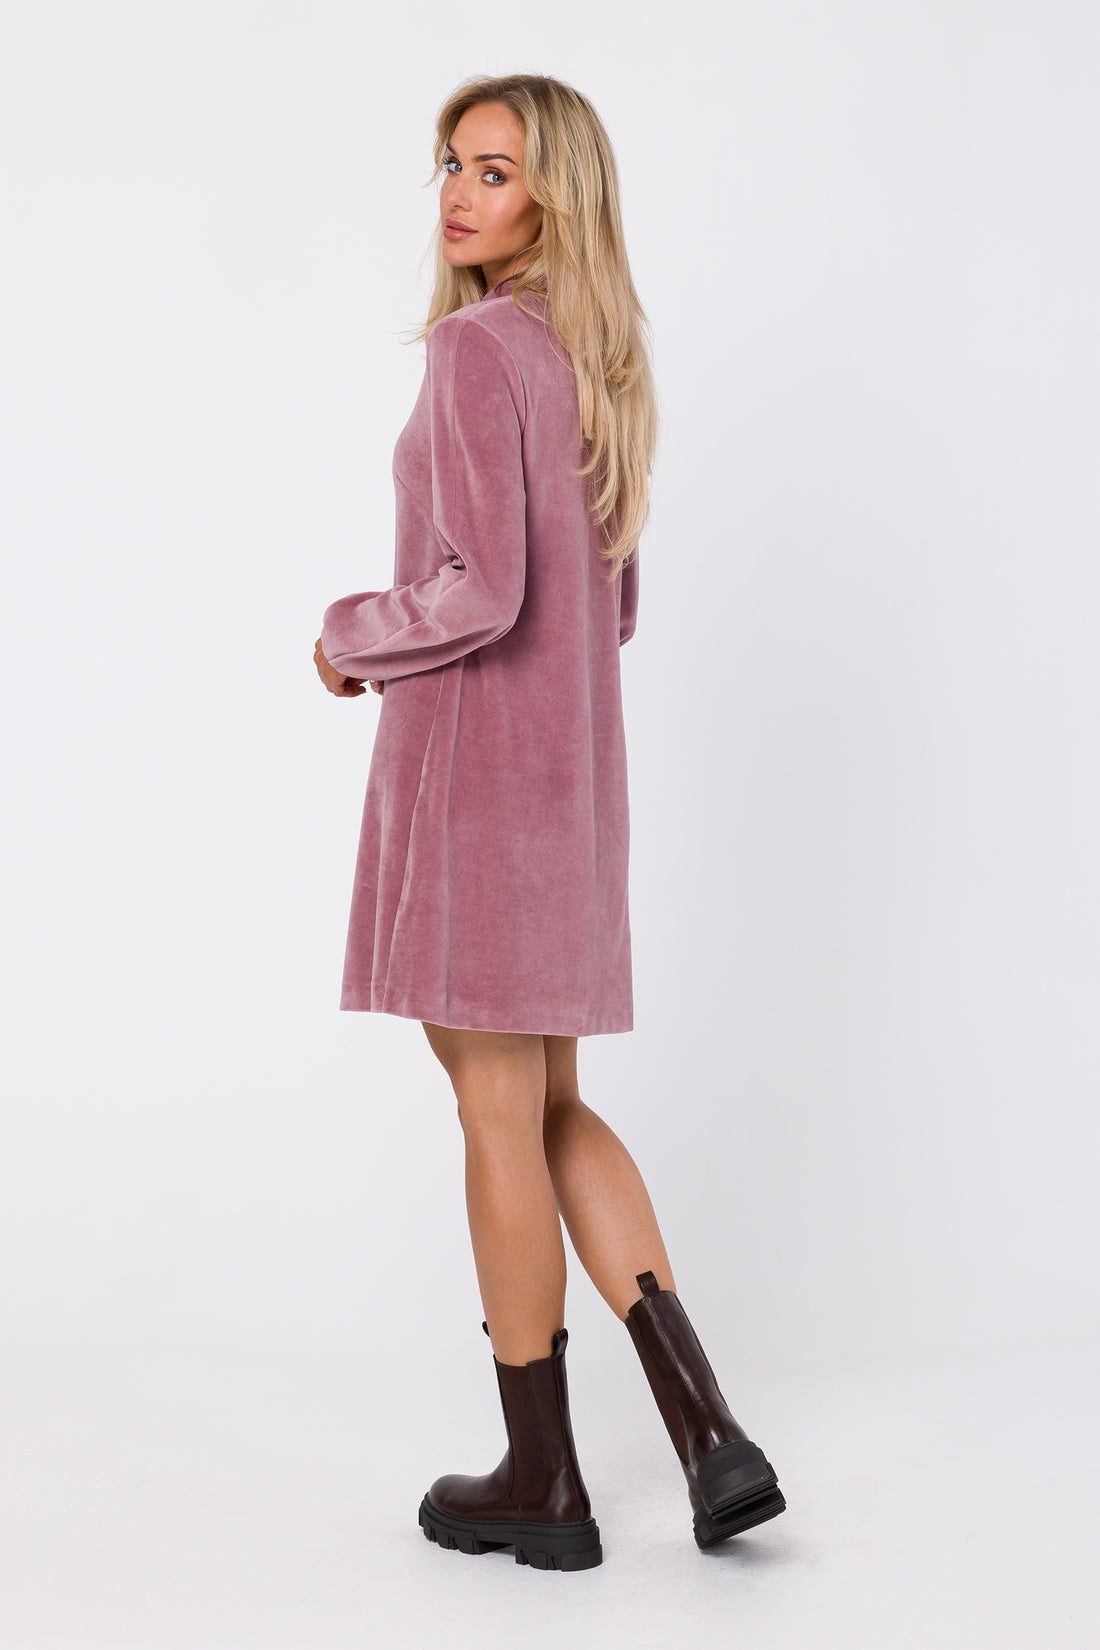 Velvet Mini Dress V-neck | Strictly In | Perfect for casual outings or evening events, pair it with ankle boots for a laid-back vibe or strappy heels for a more polished look.